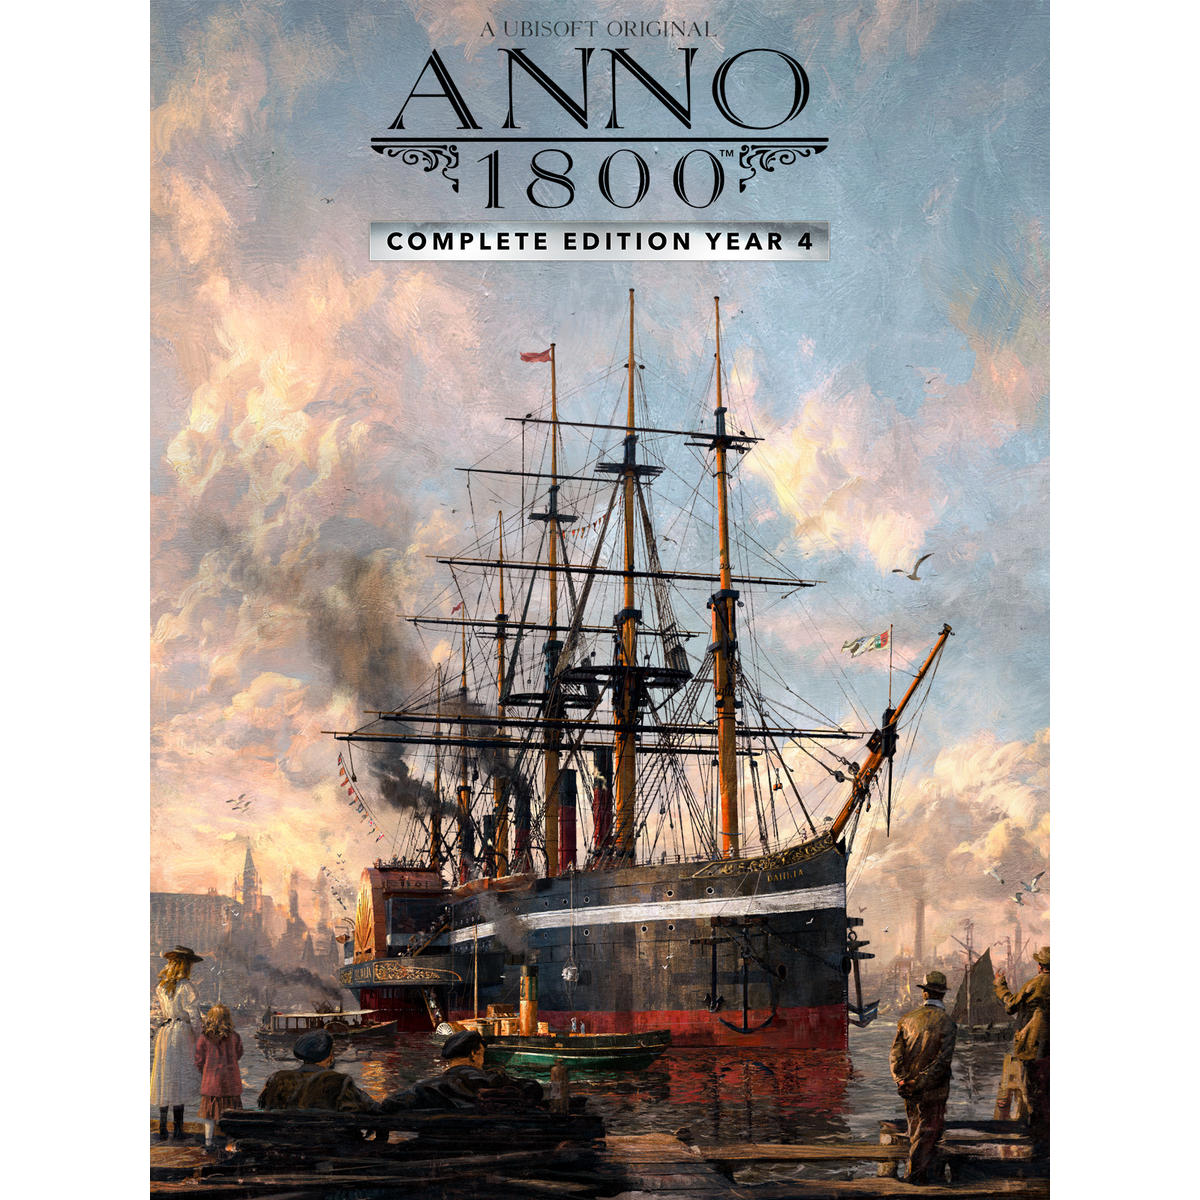 https://www.shopto.net/userdata/dcshop/images/normal/316638_anno-1800-complete-edition-year-4.png